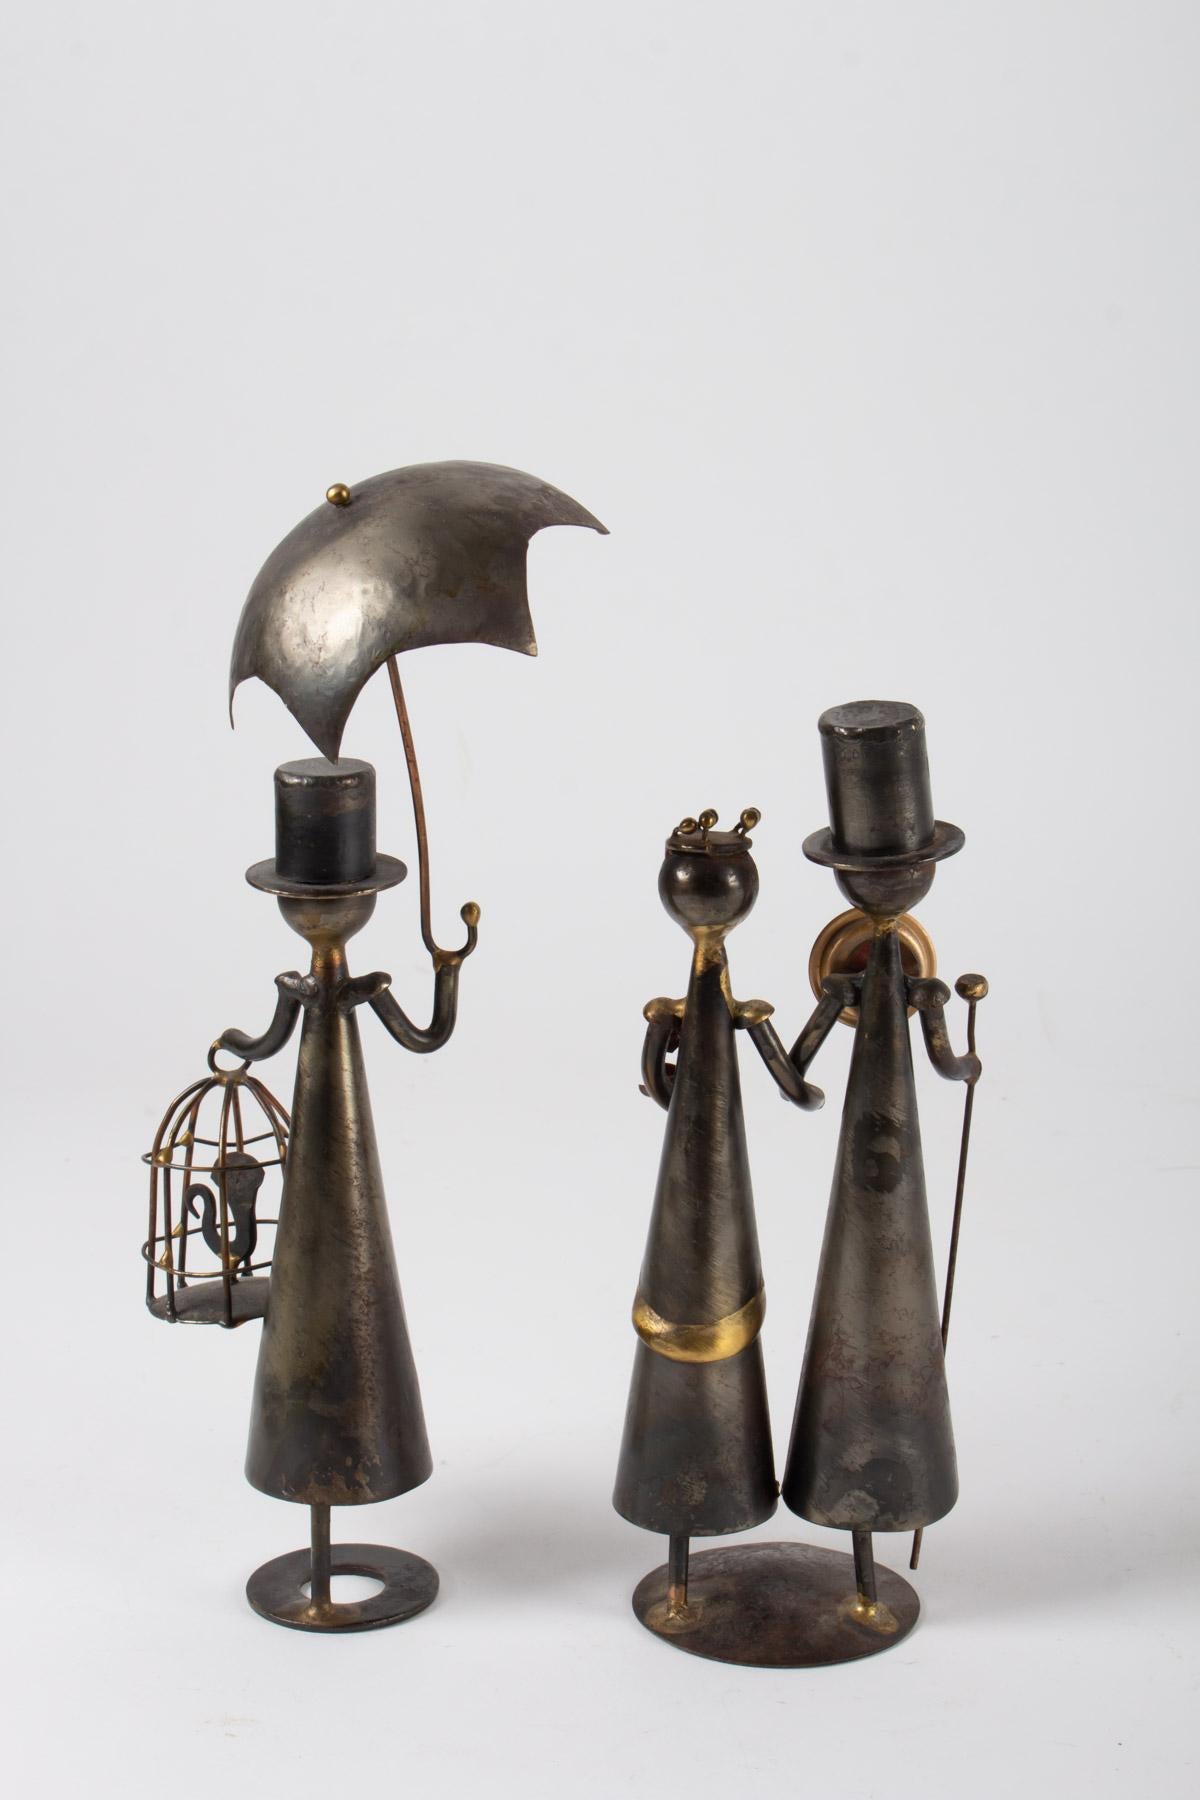 Belle Époque Sculpture, Man with Umbrella and Couple in Thermometer, Belle Epoque, 1900-1920